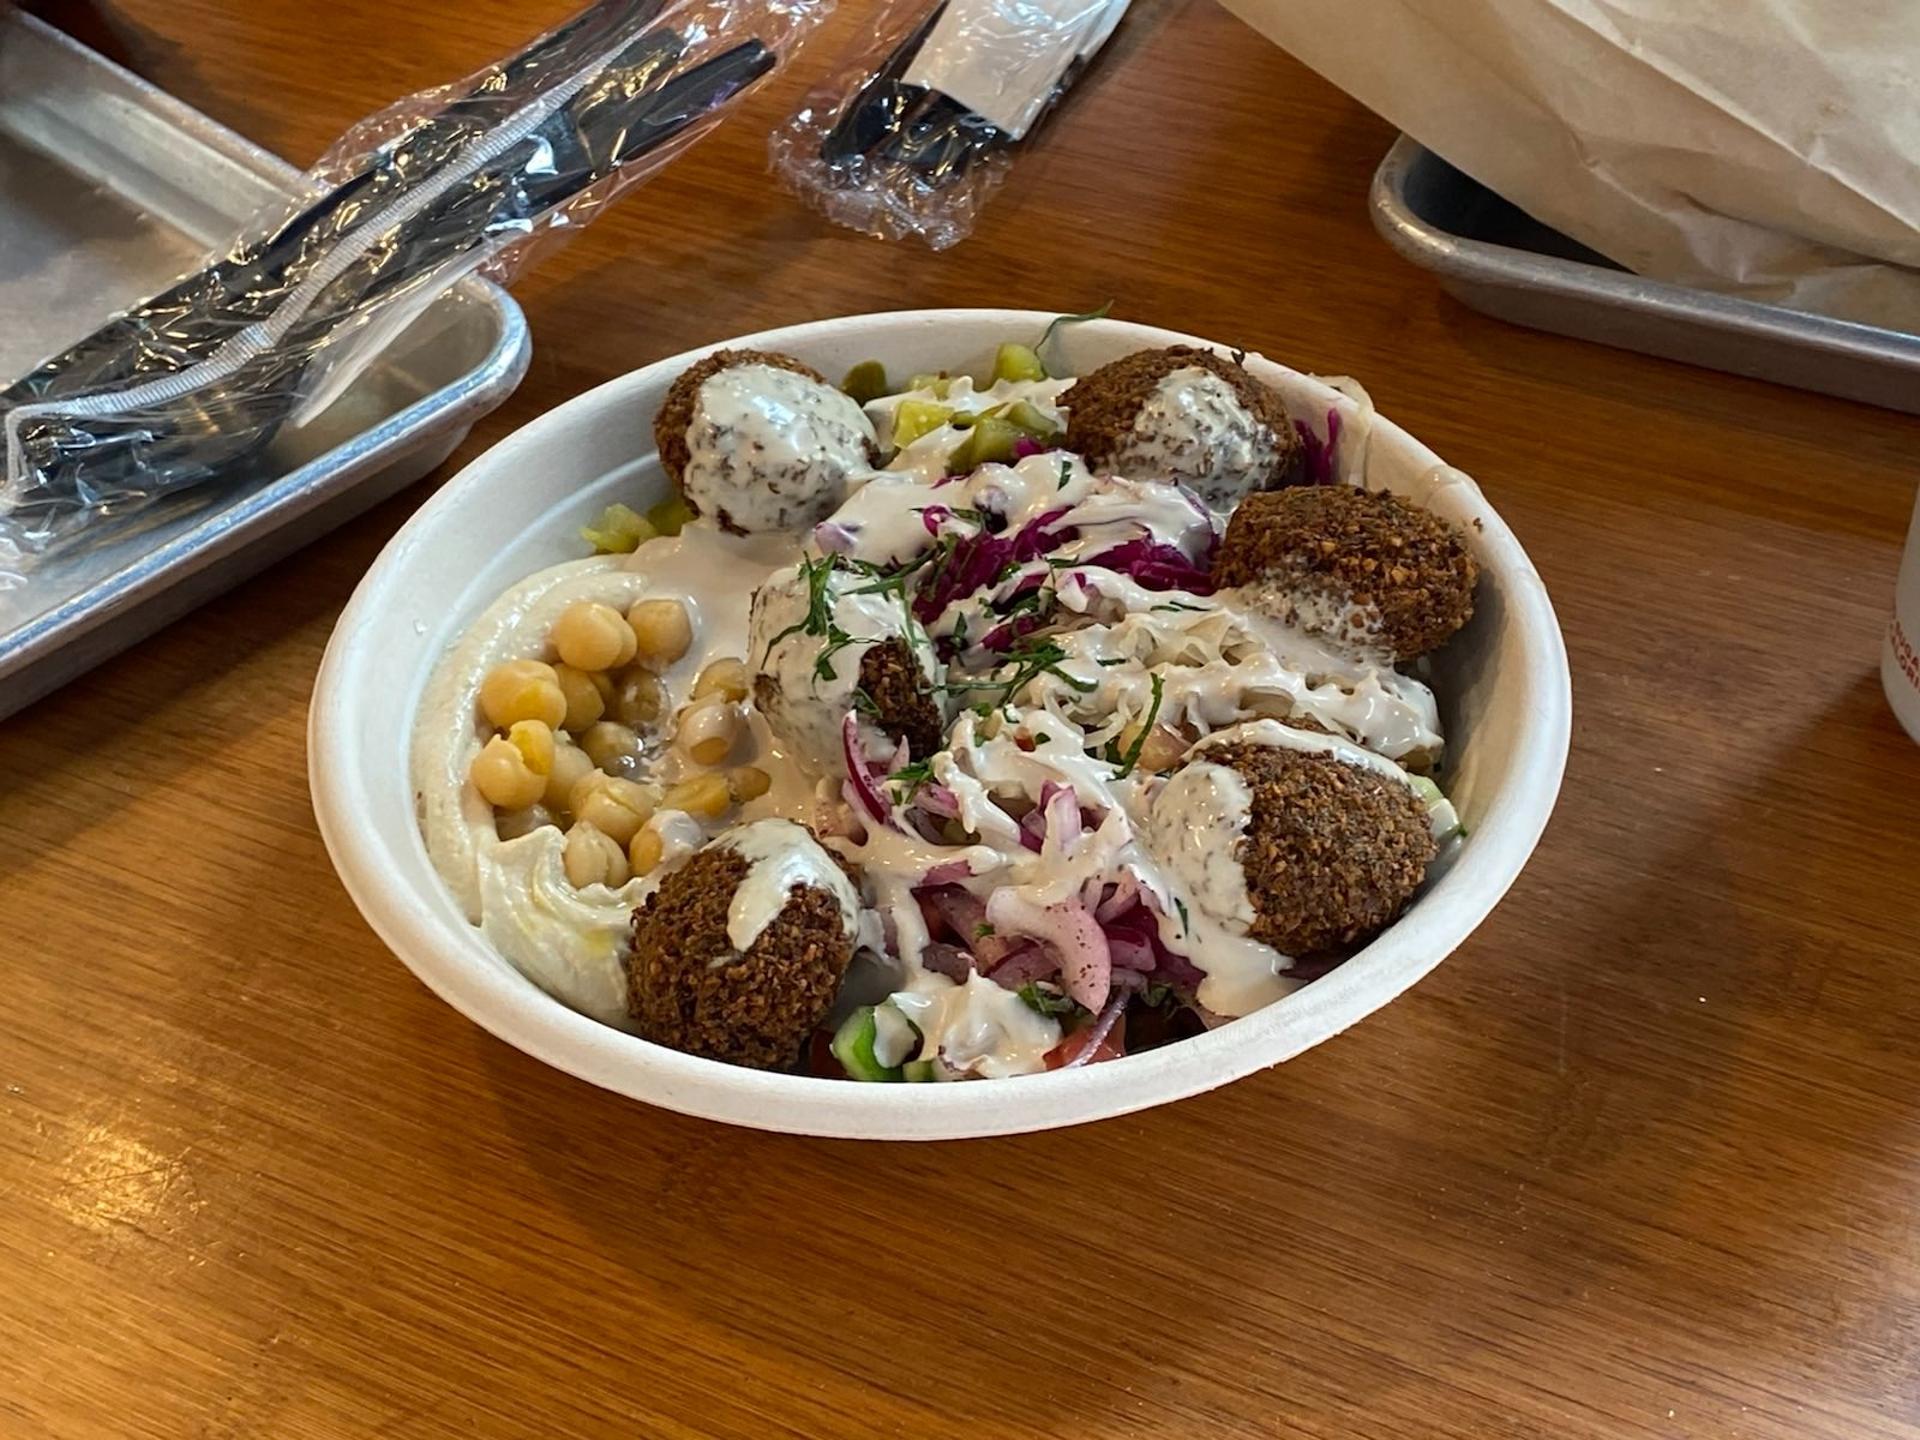 Image of some food from Tamam Falafel